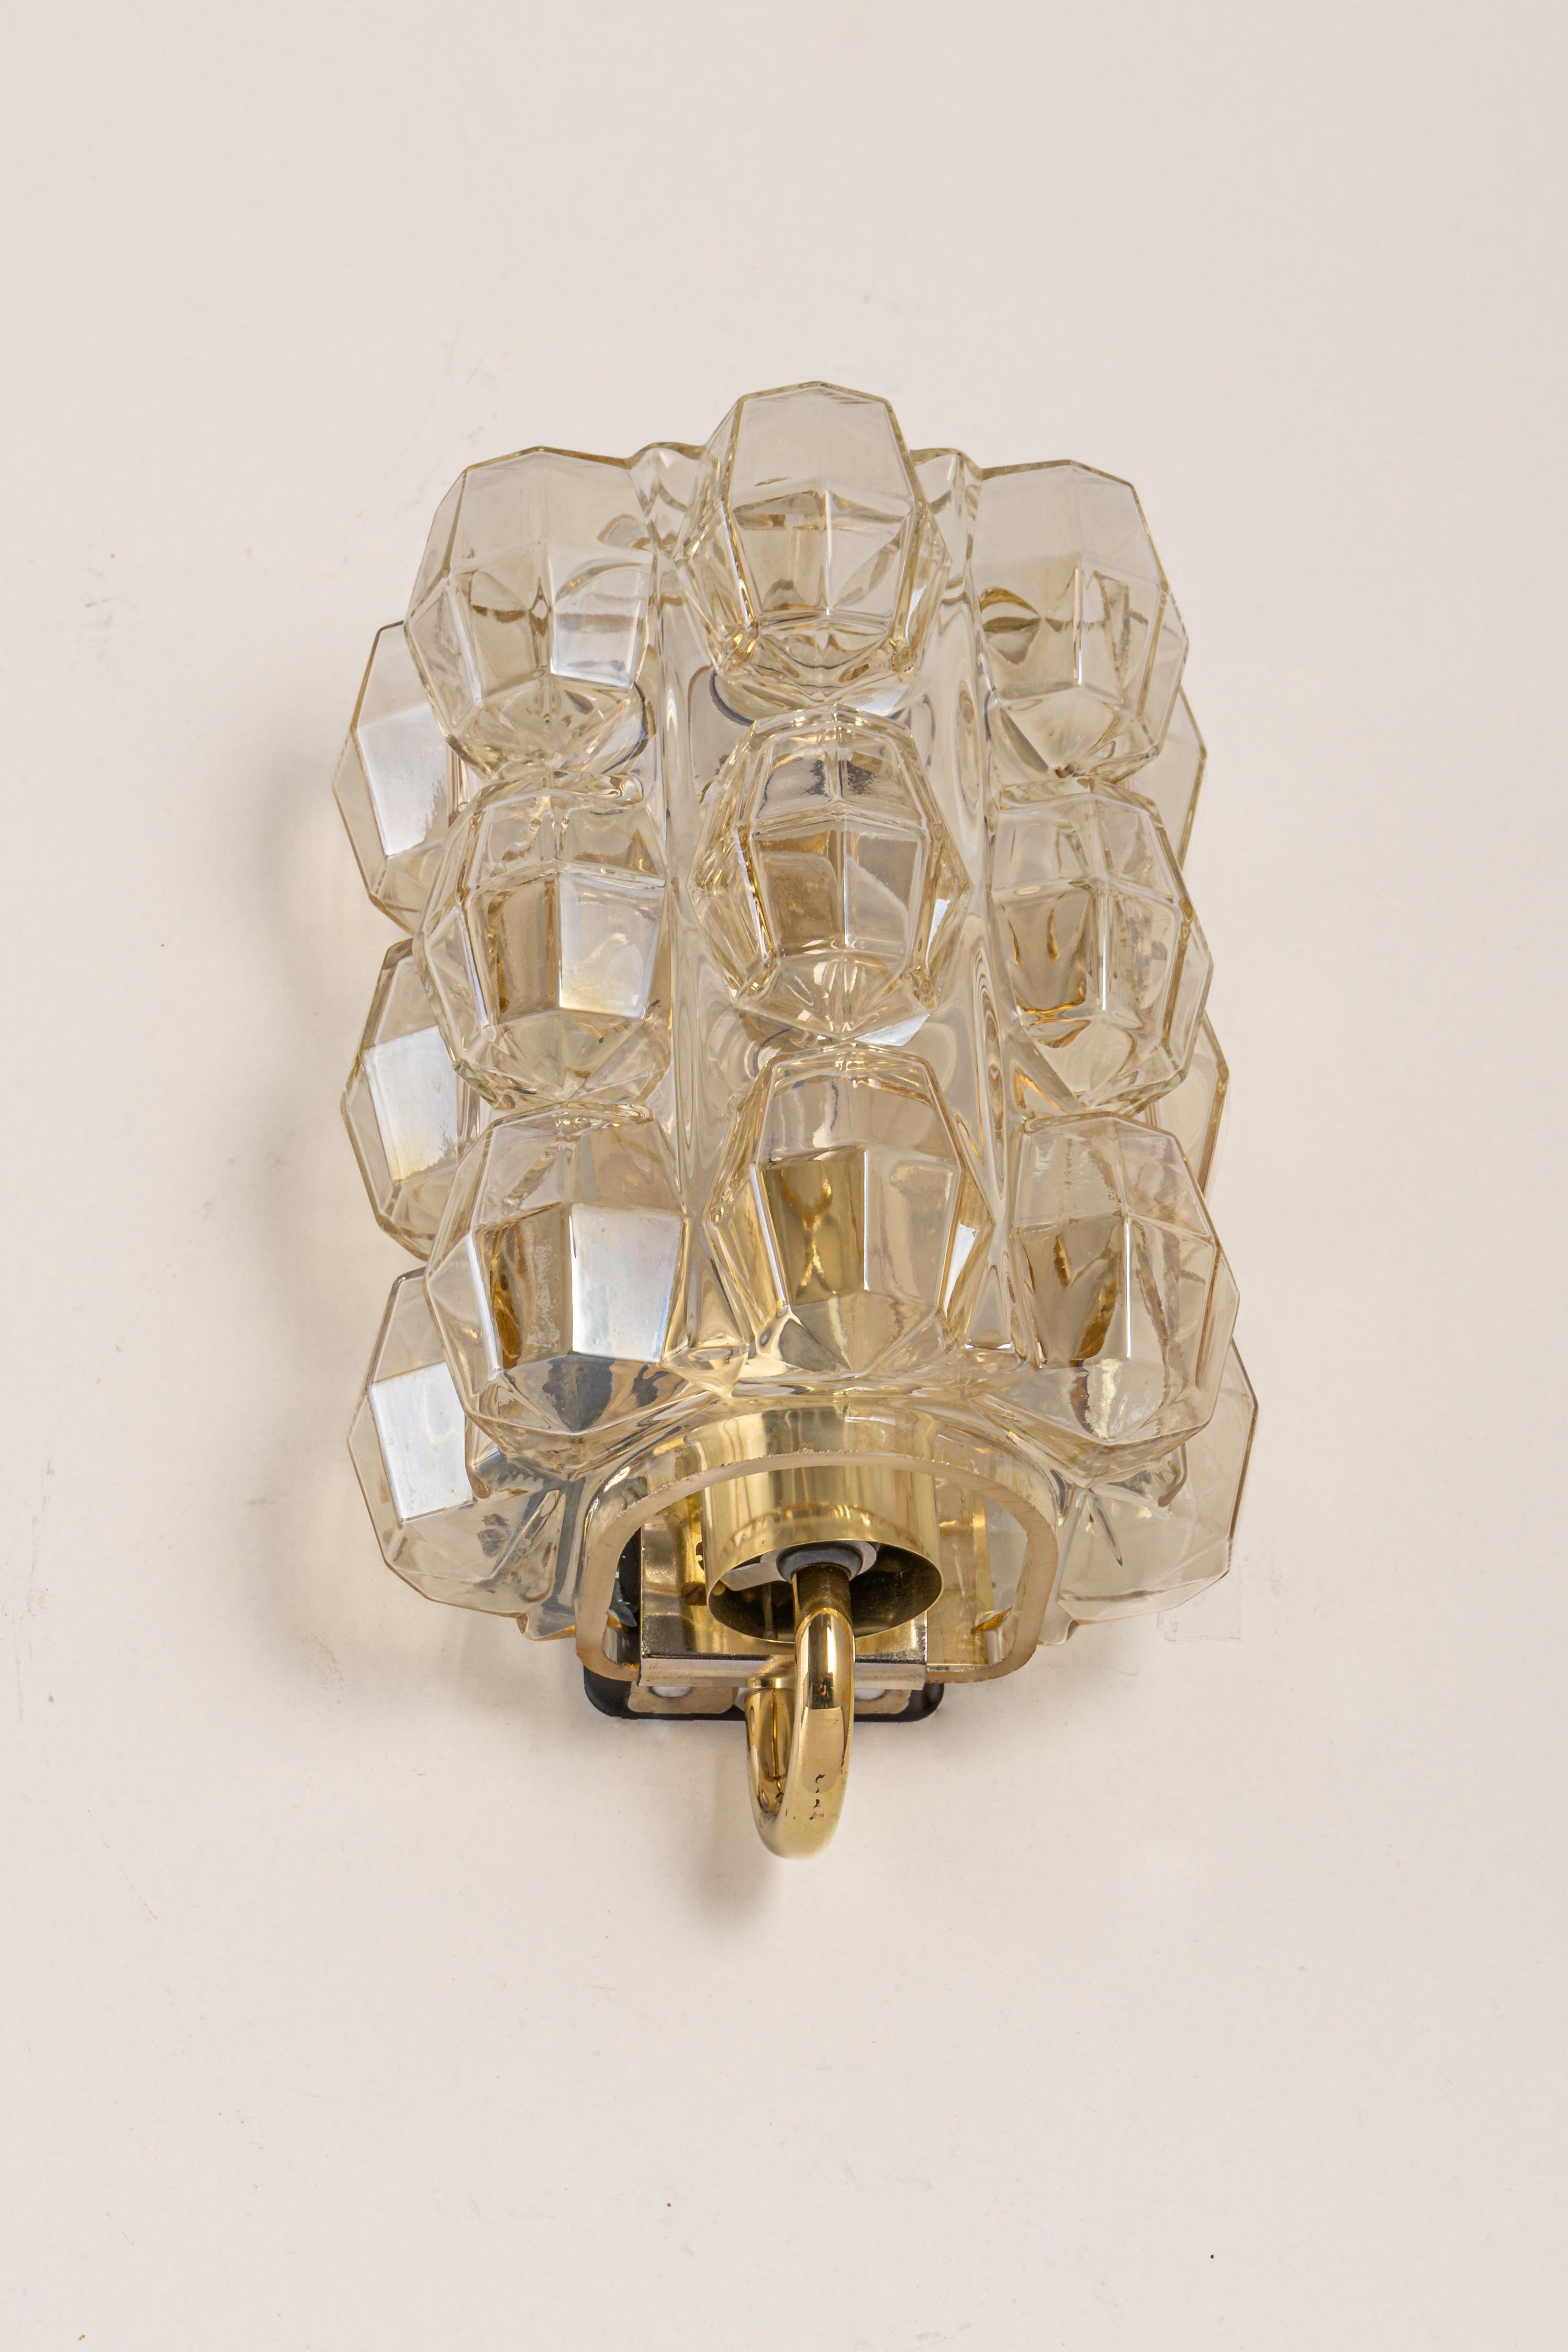 Wonderful large golden wall light, from Limburg Glashütte, Germany, circa 1960-1970. Smoked bubble glass on a golden brass base.

Heavy quality and in very good condition. Cleaned, well-wired, and ready to use. 
The fixture requires 1 x E27